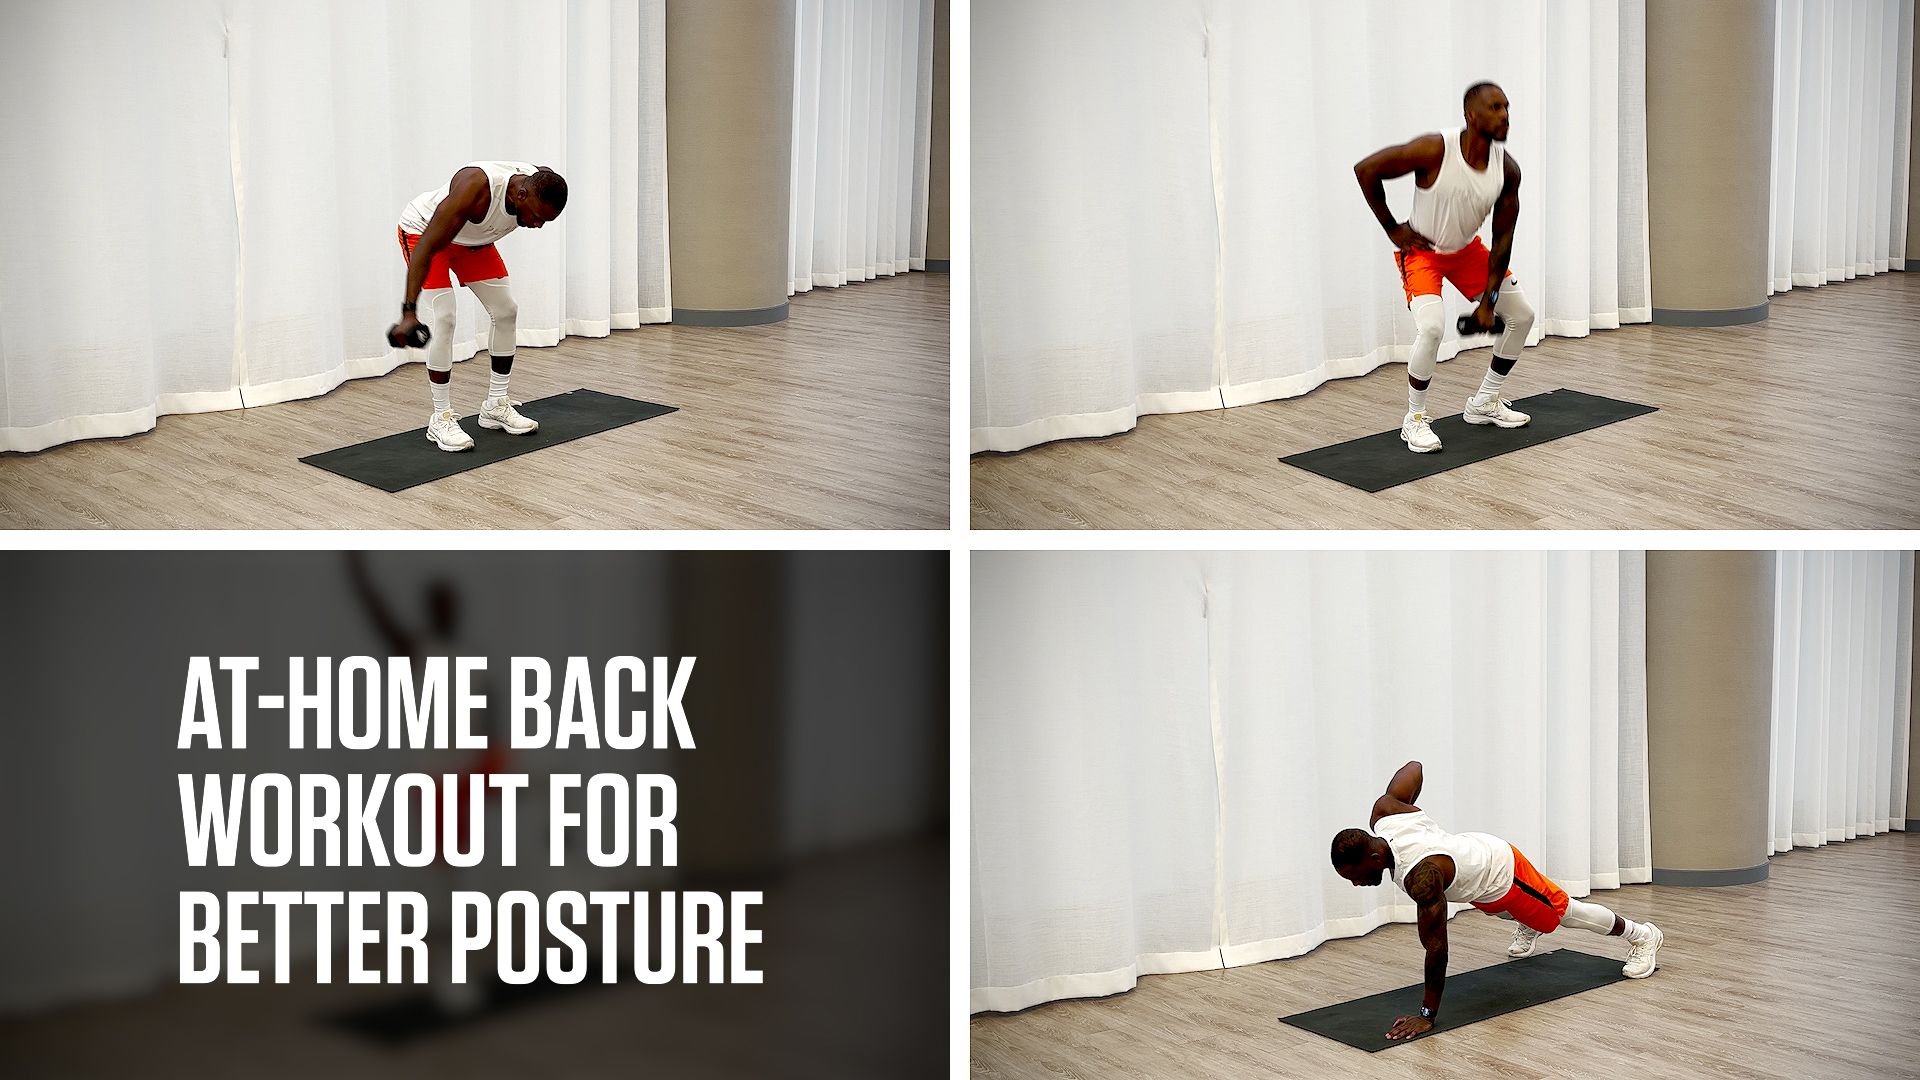 Do This Back Workout at Home and Improve Your Posture